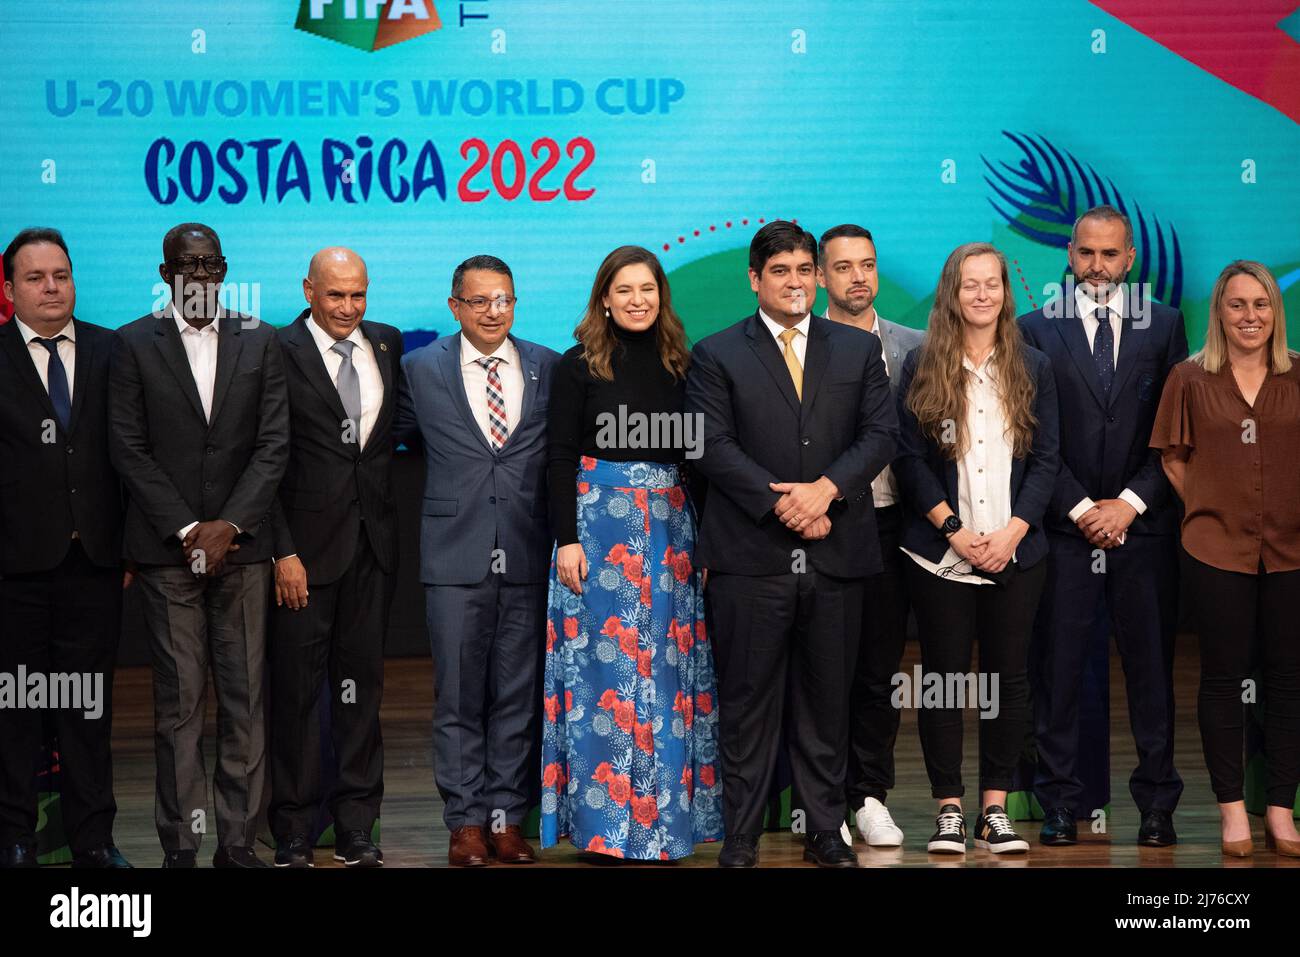 SAN JOSE, Costa Rica: President of the Republic of Costa Rica, Mr Carlos Alvarado and the First Lady, Mrs Claudia Camargo, shared the stage with the c Stock Photo